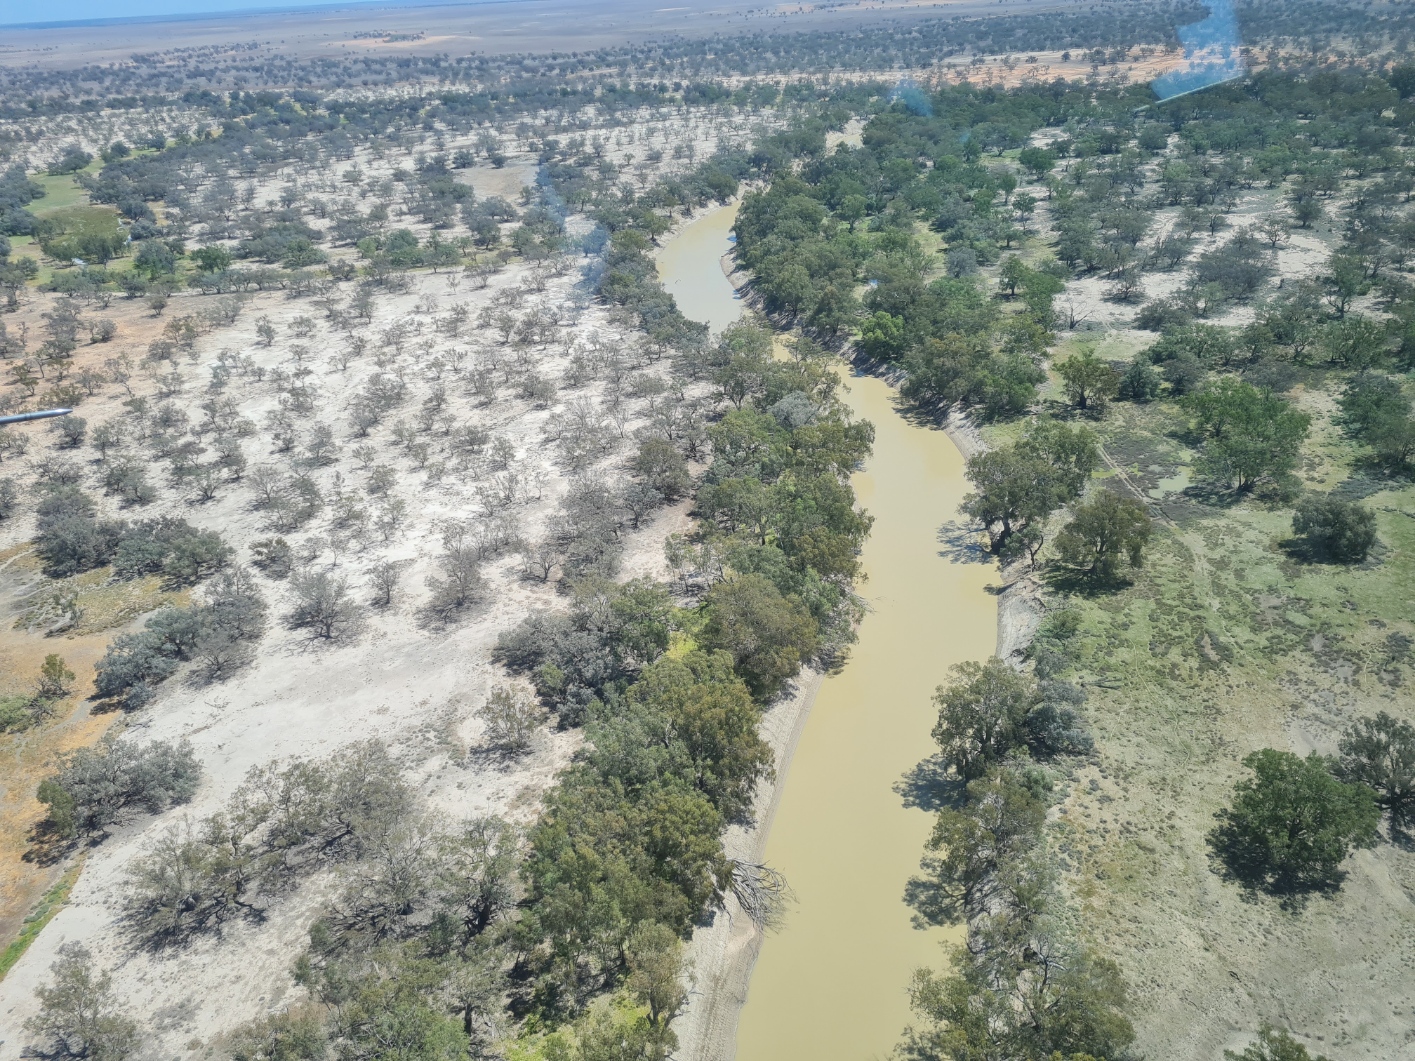 Surveying the Darling River around Louth